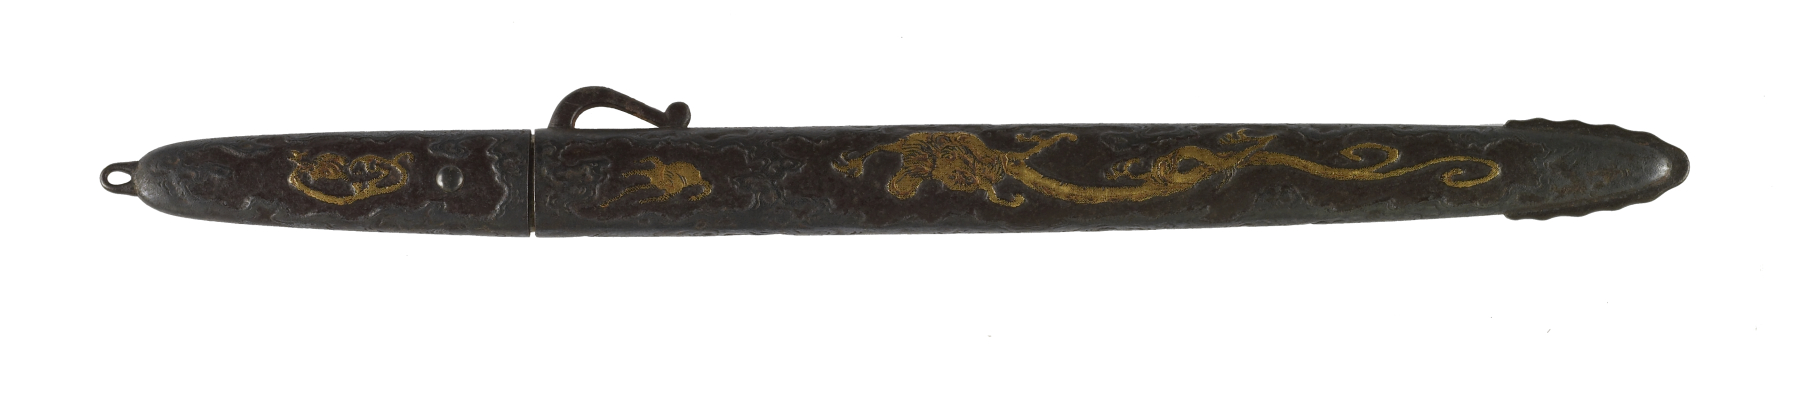 Image for Kozuka mounted as a knife with dragon and cloud designs